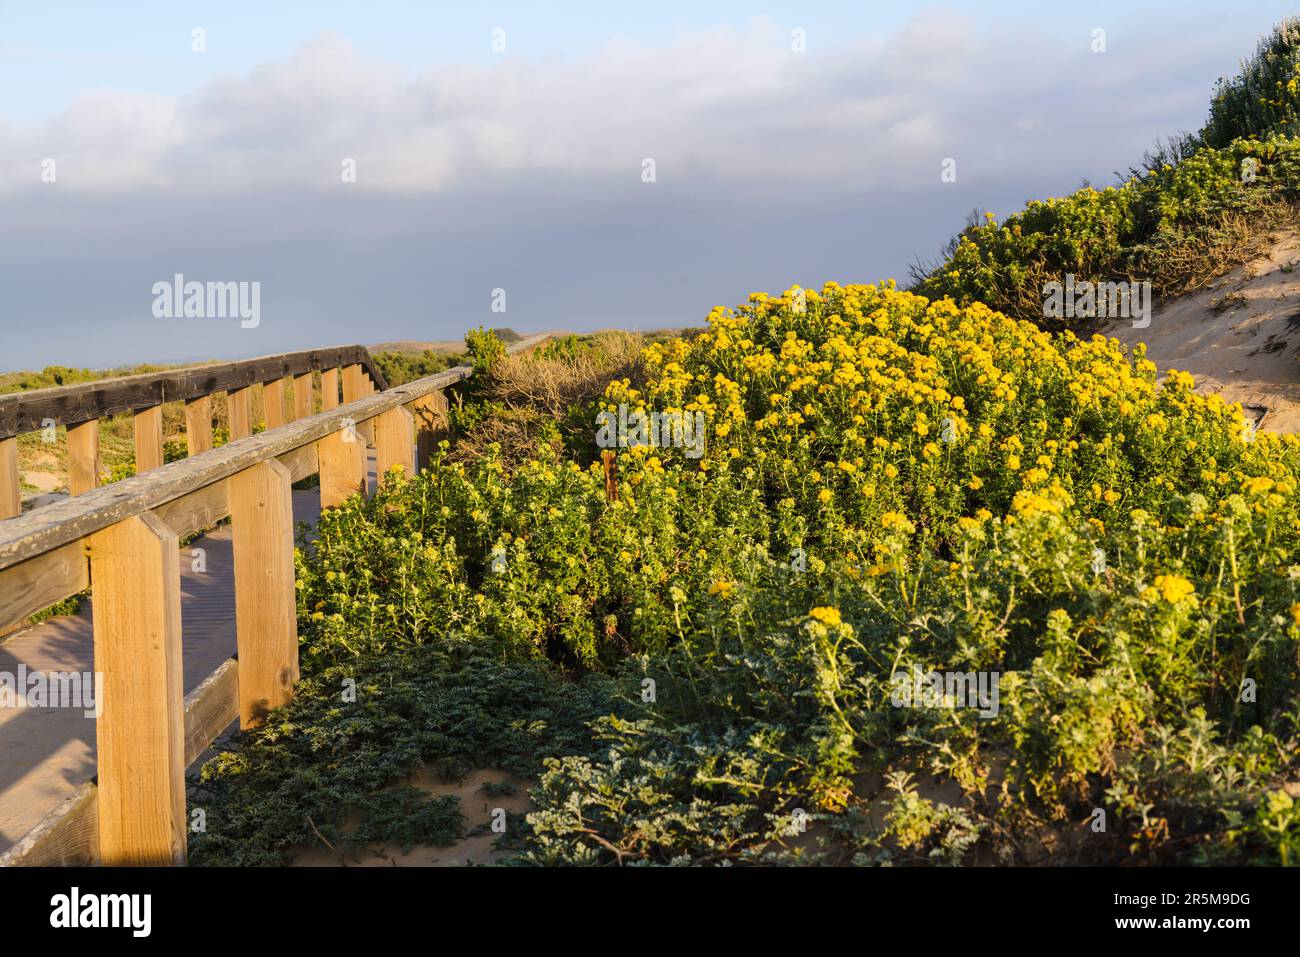 An old wooden boardwalk through sand dunes, and beautiful seaside woolly sunflowers in bloom. Rural landscape at sunset with cloudy sky in the backgro Stock Photo